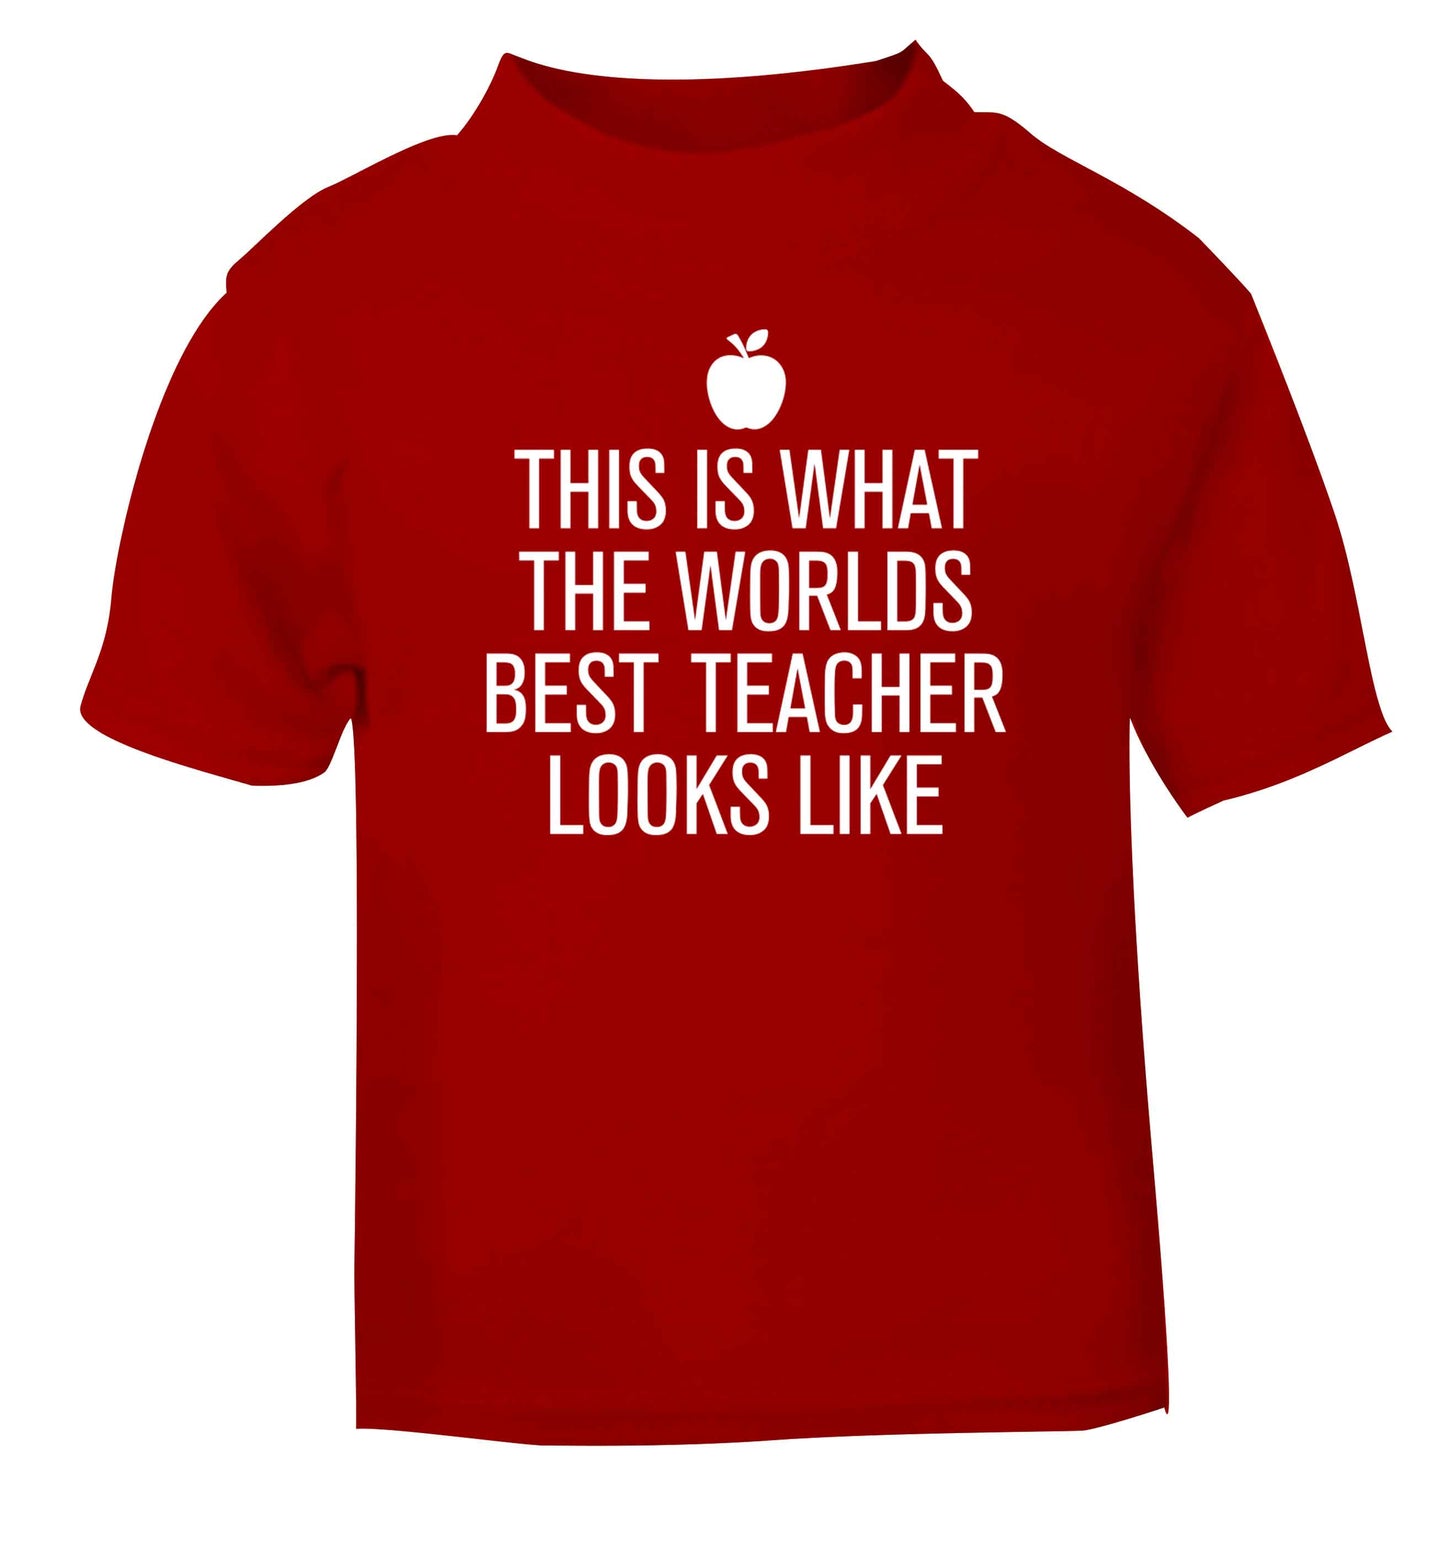 This is what the worlds best teacher looks like red baby toddler Tshirt 2 Years